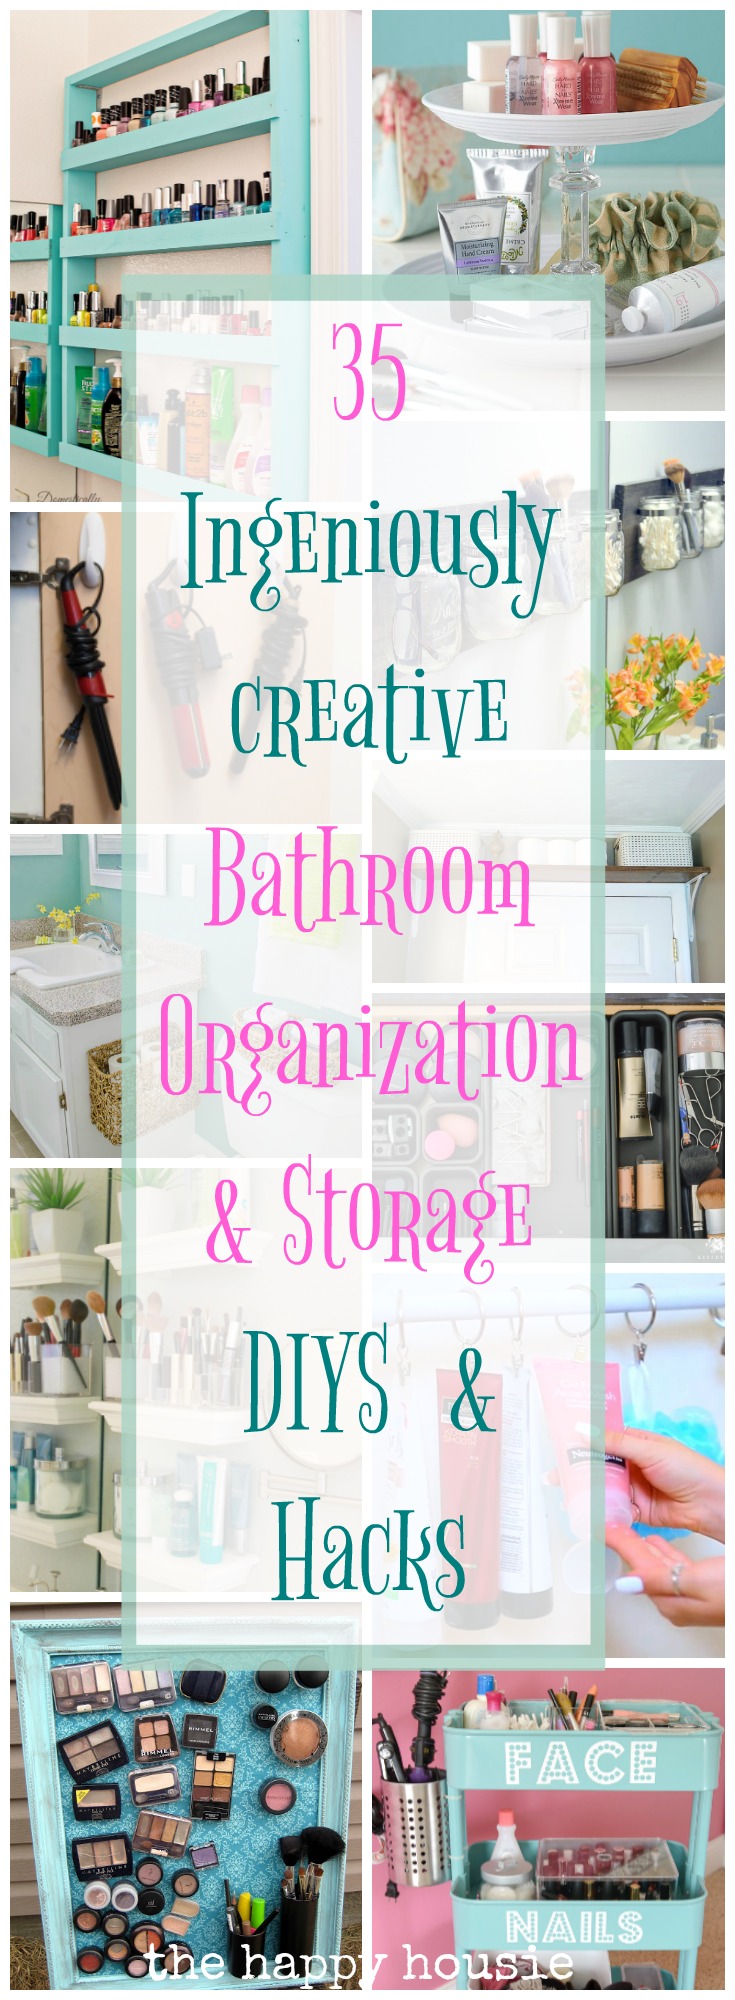 https://www.thehappyhousie.com/wp-content/uploads/2017/02/35-Ingeniously-This-is-so-creative-I-love-how-it-turned-out_-Bathroom-Organization-and-Storage-DIYs-and-Hacks-that-youll-wonder-why-you-never-thought-of.jpg